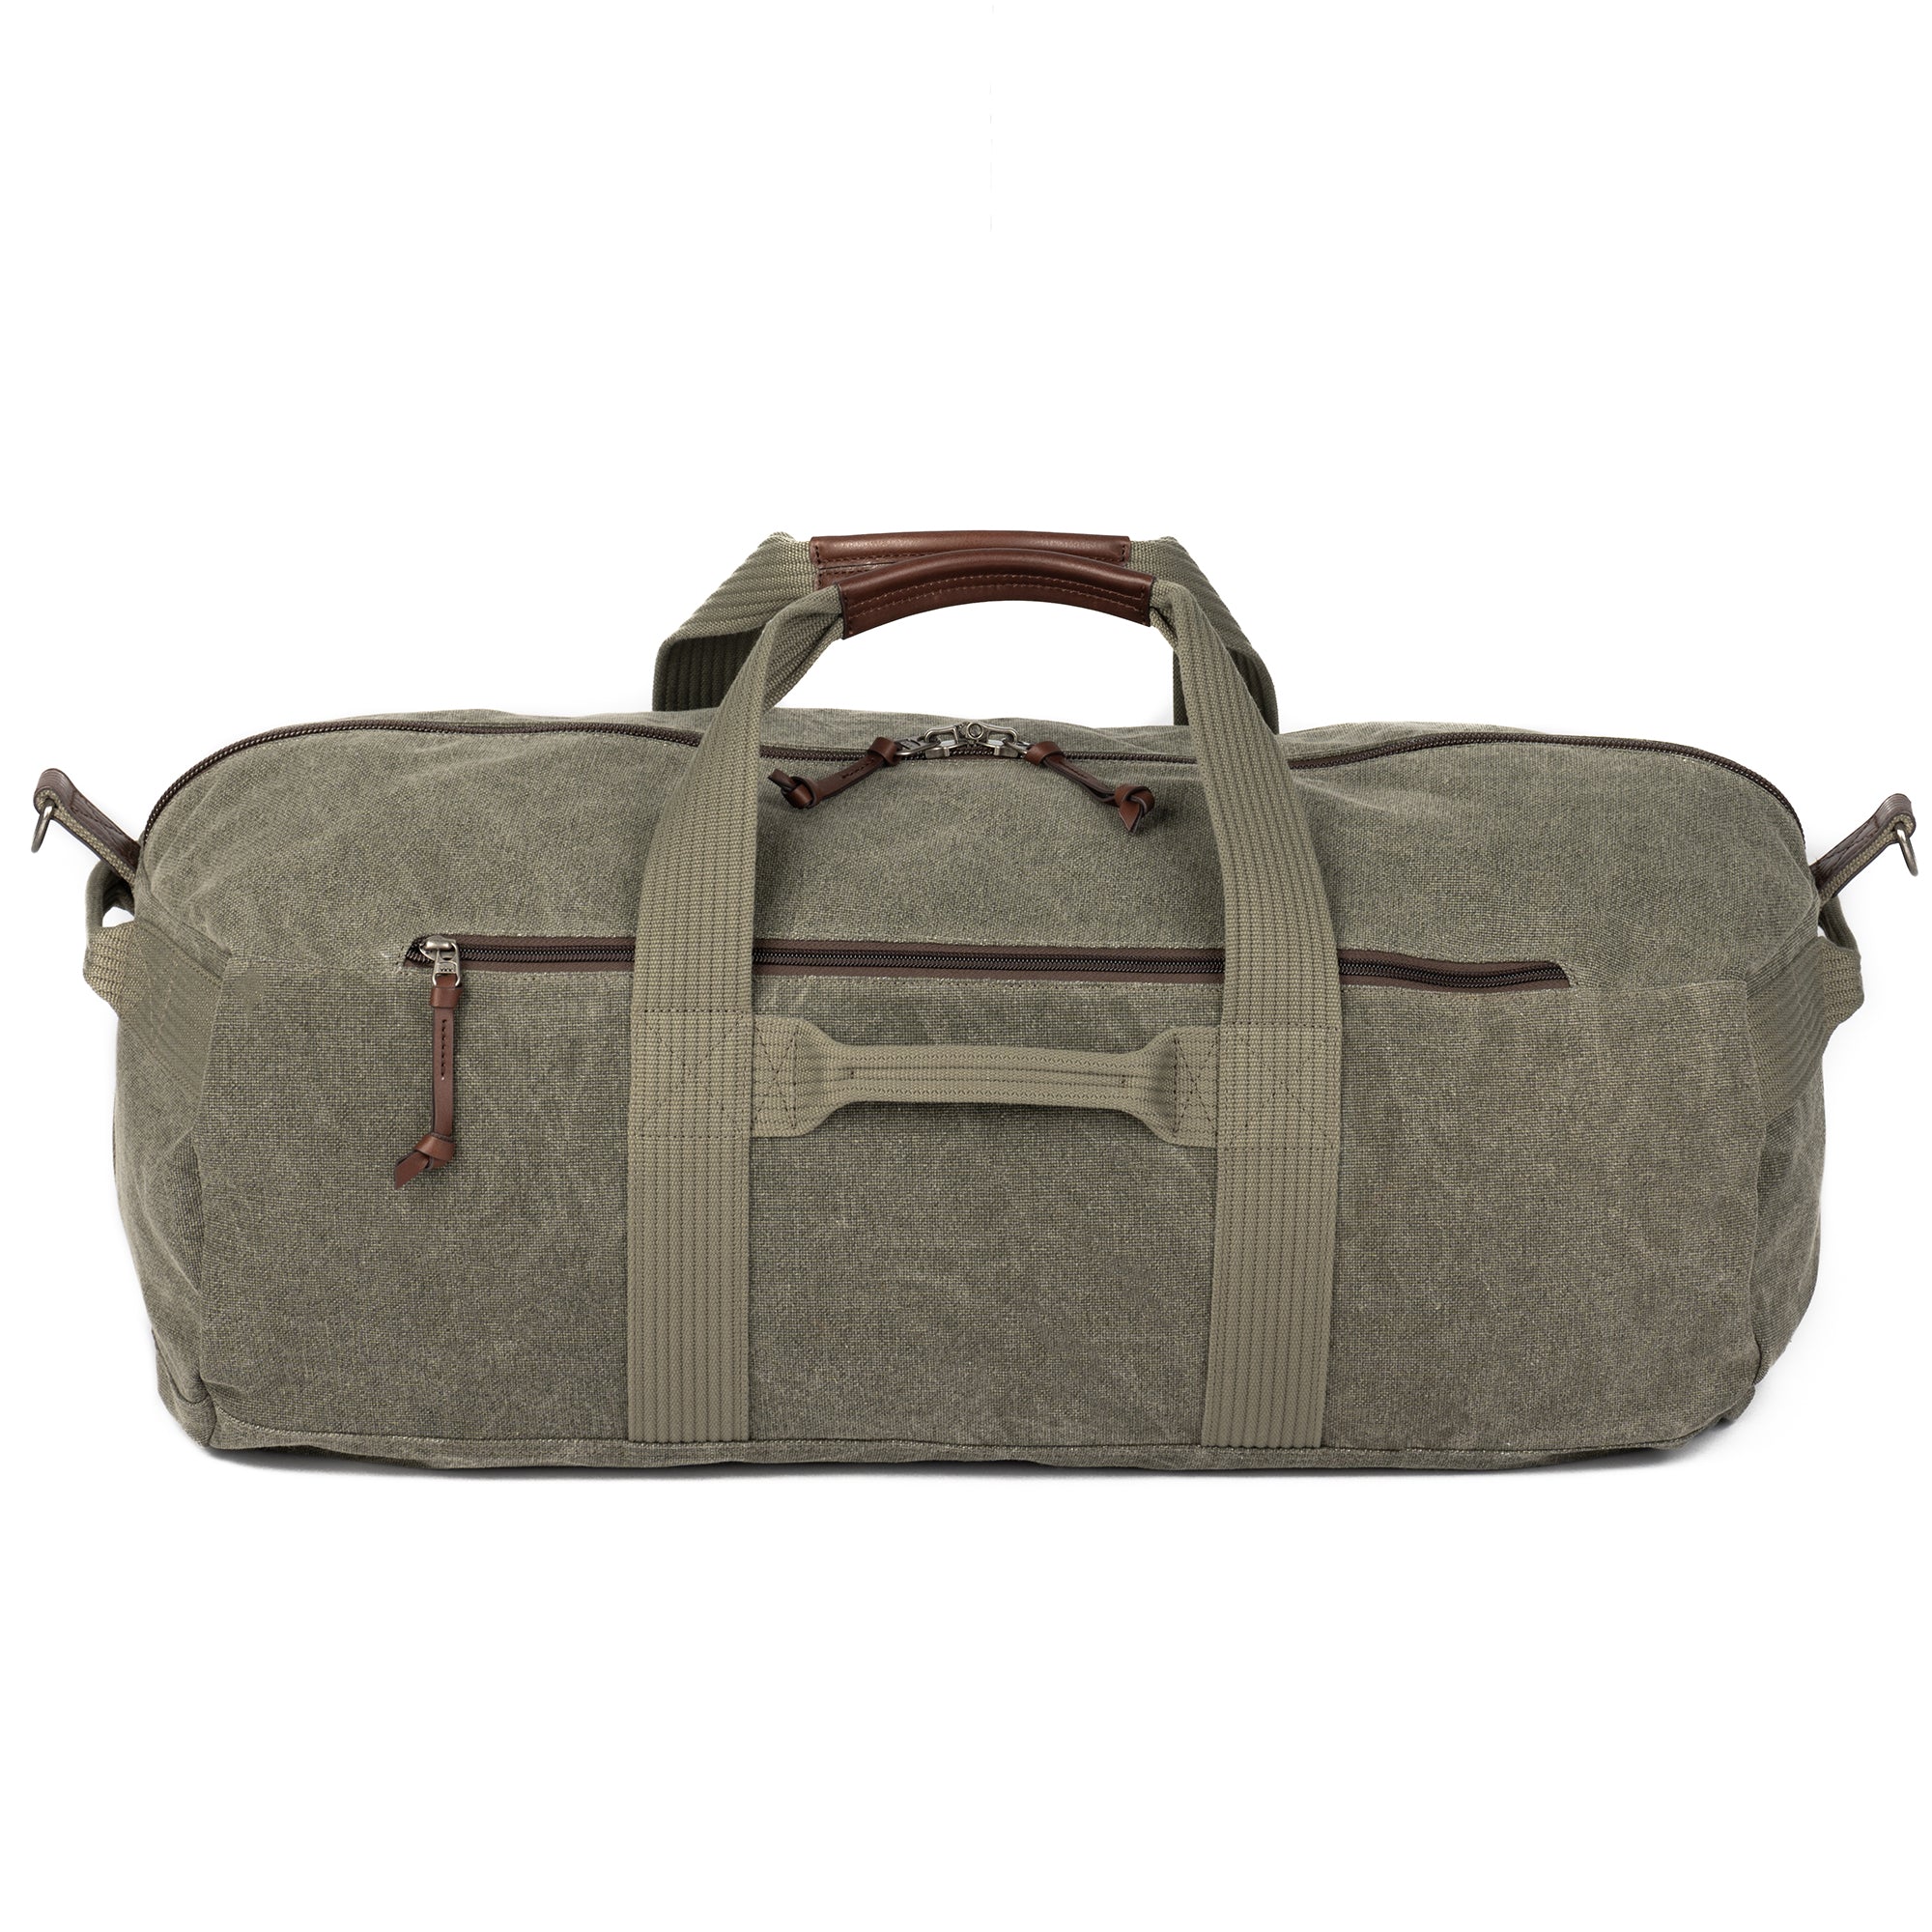 Retrospective® 75 Duffel Bag for travel, sports, and adventure – Think ...